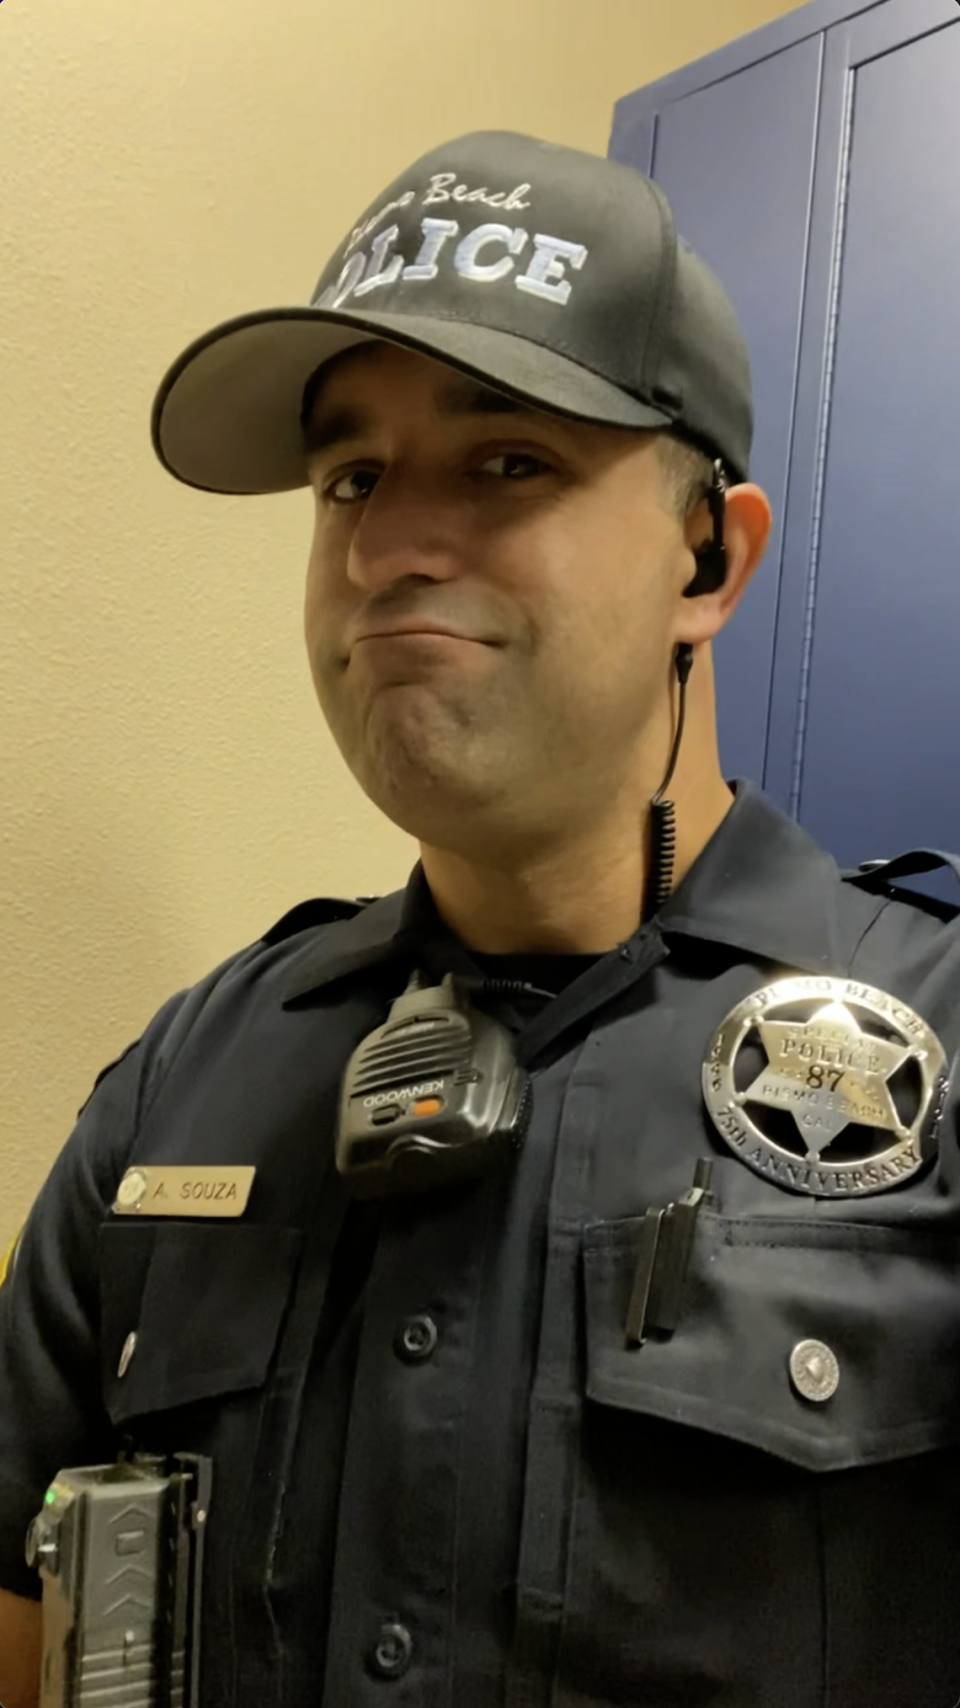 Former Pismo Beach Police Department sergeant Adrian Souza appears in a sexually suggestive video that he sent while on duty, according to an investigation by the agency’s Internal Affairs Division.